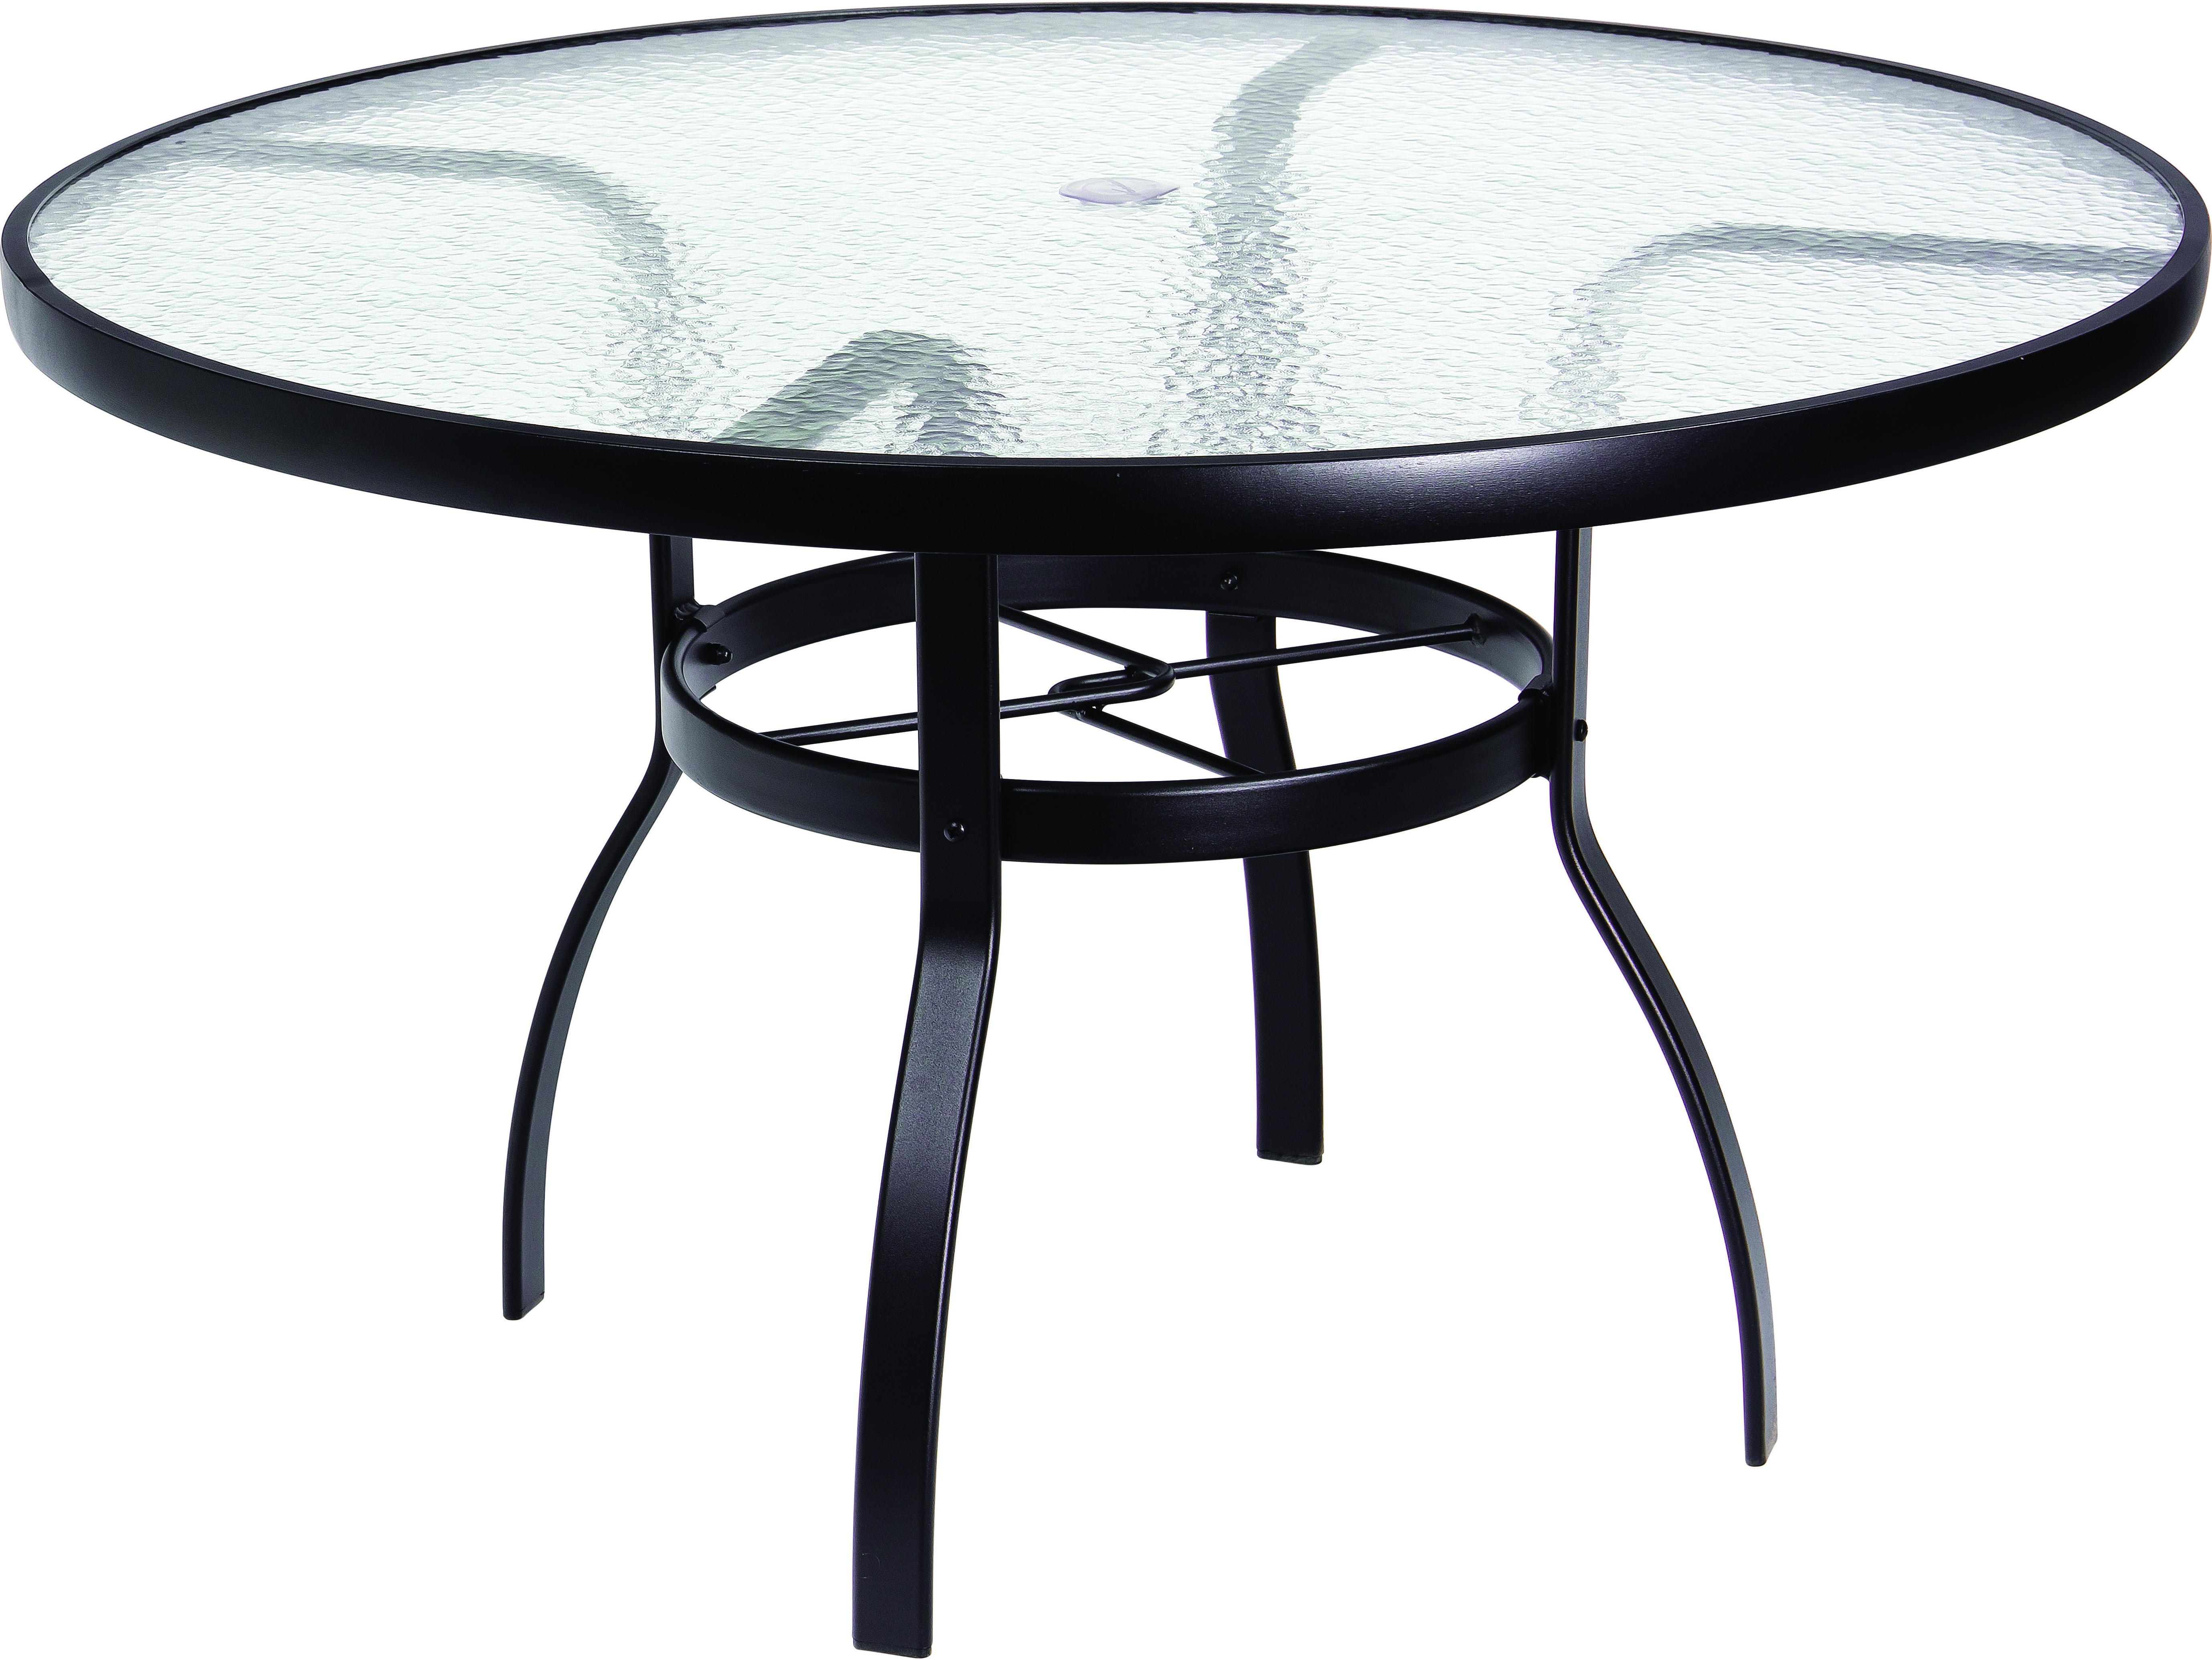 Round Acrylic Top Dining Table, 50 Inch Round Plexiglass Table Top